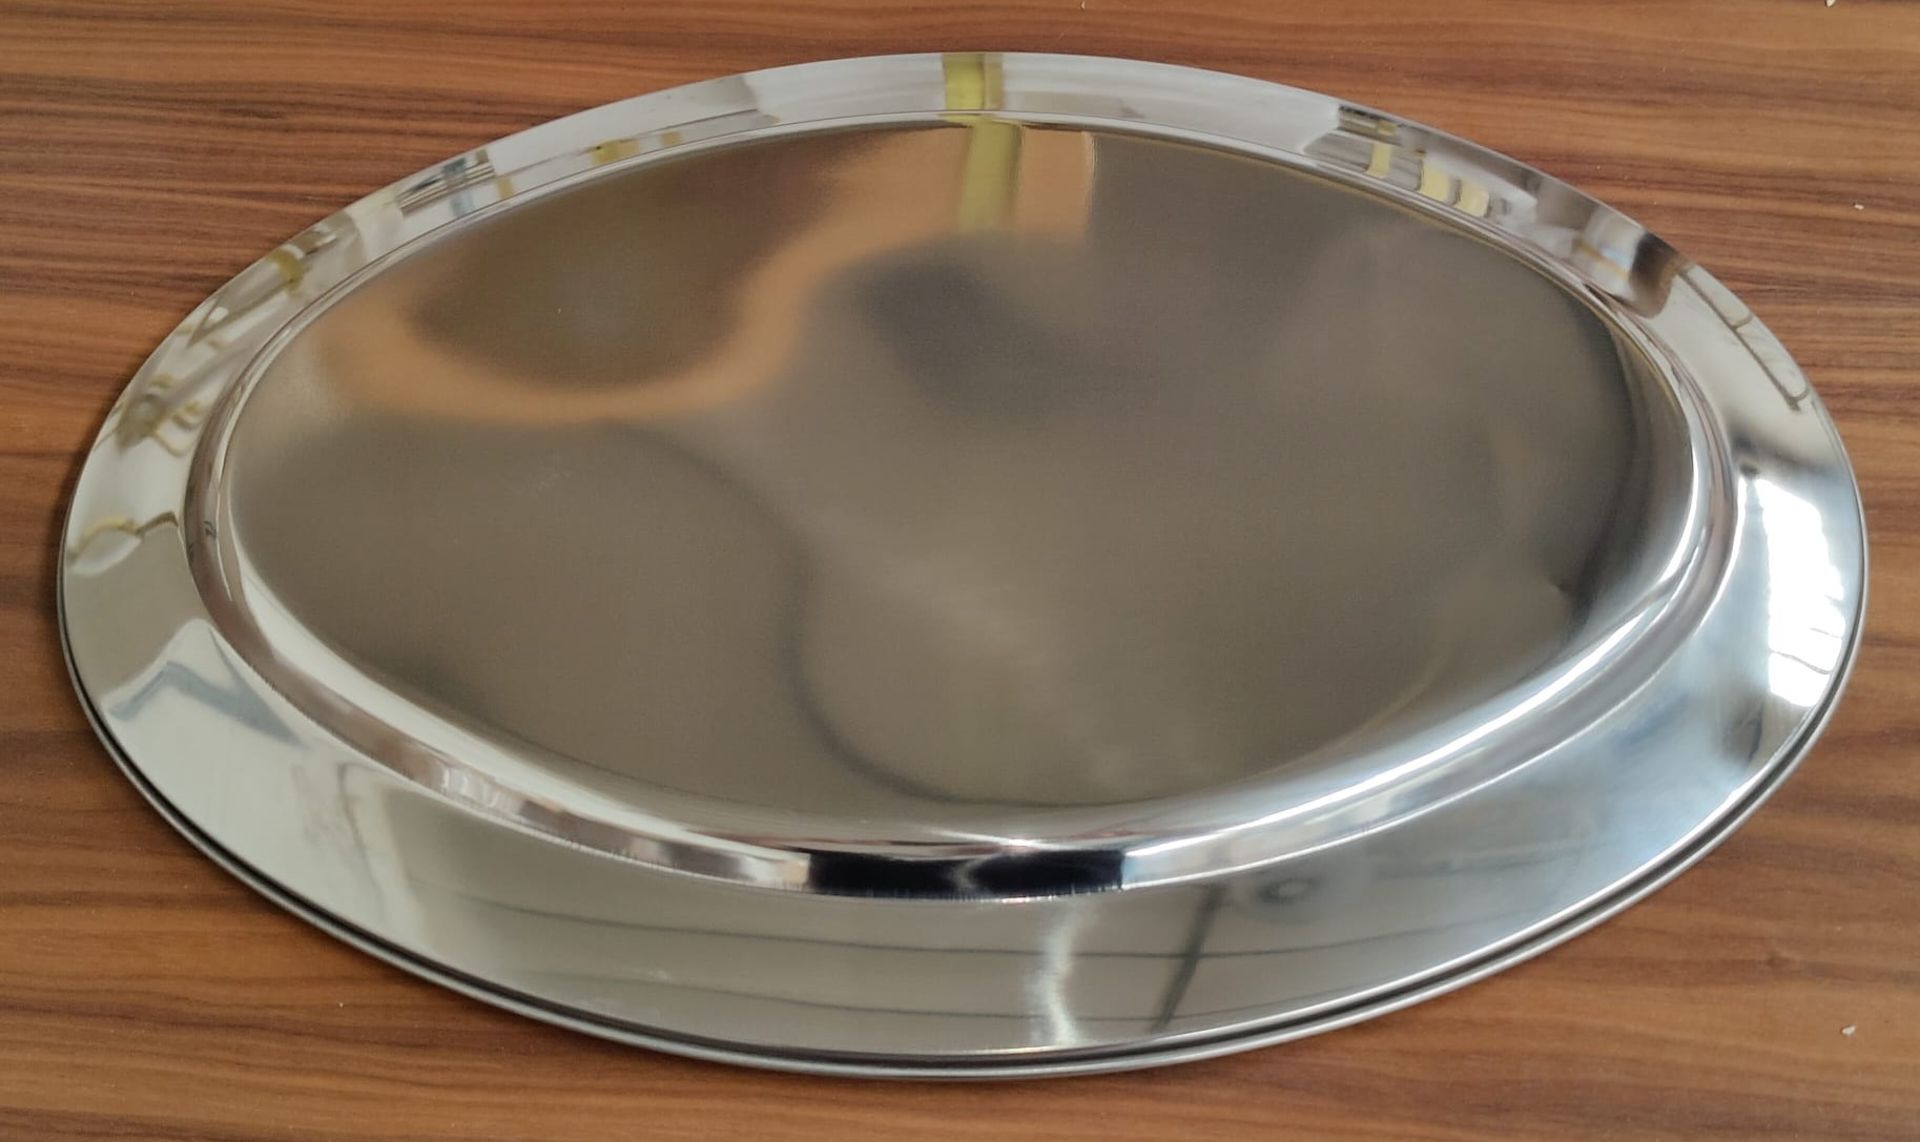 20 x Stainless Steel Oval Service Trays - Size: 450mm x 310mm - Brand New Boxed Stock - RRP £200 - Image 7 of 8